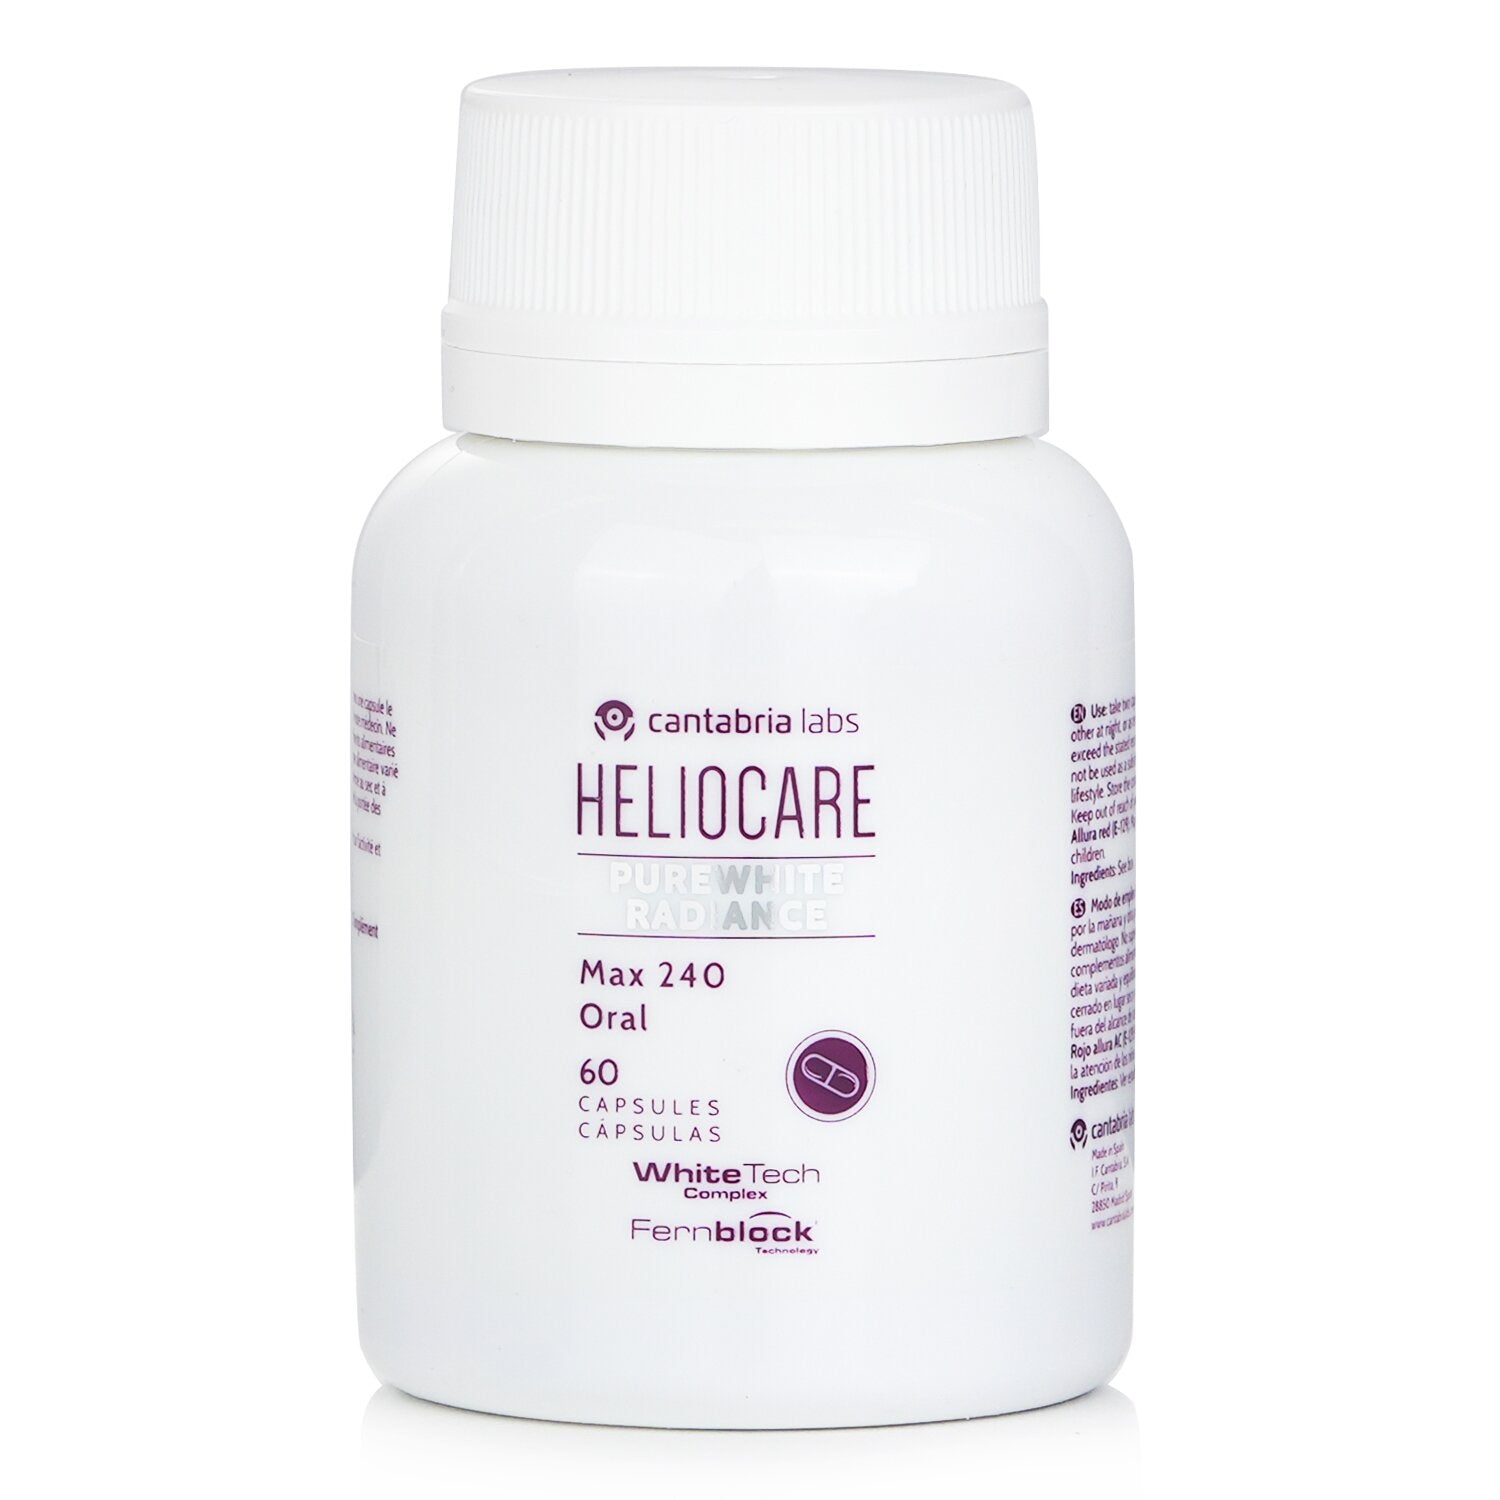 Heliocare by Cantabria Labs Purewhite Radiance Max 240 Oral 60capsules ...